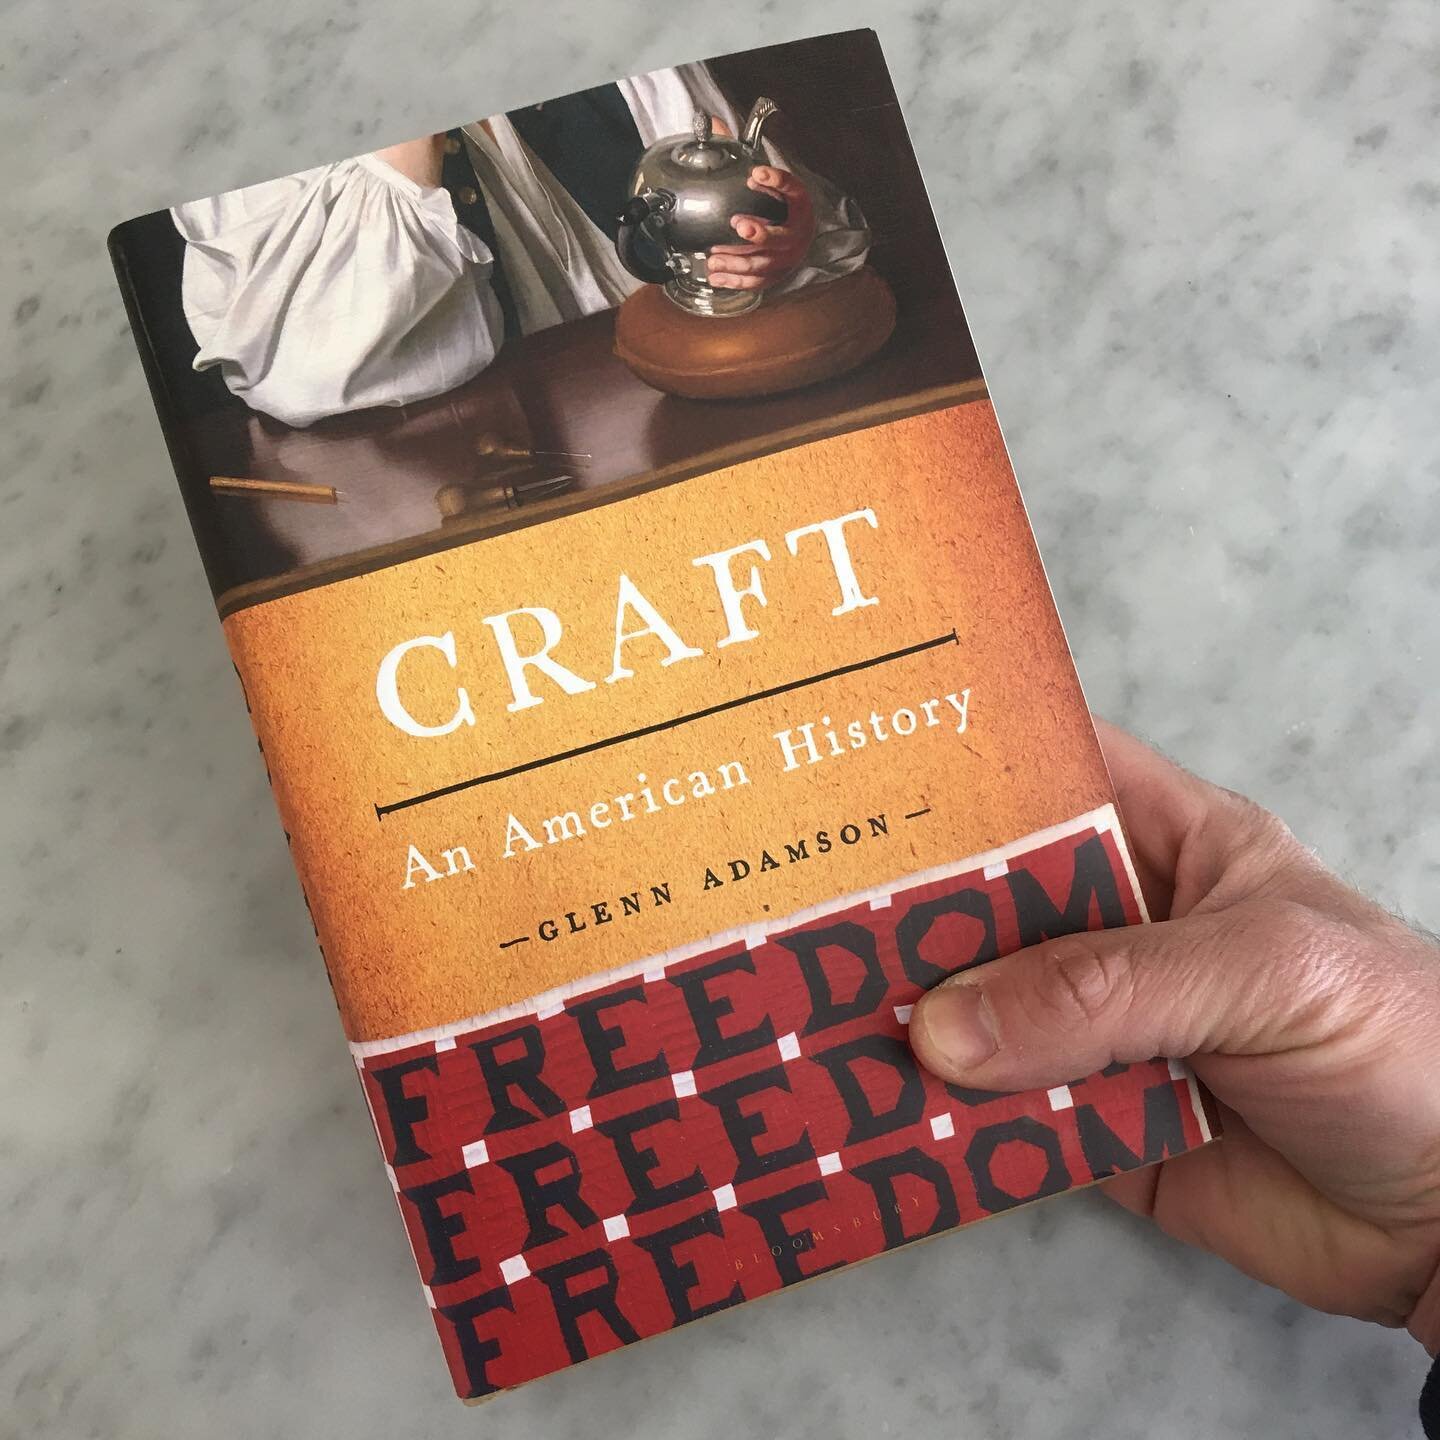 Beyond excited to read Craft: An American History by @glenn_adamson I&rsquo;ve been eagerly anticipating the arrival of Craft since being completely captivated by his previous book Fewer, Better Things.  #craft #americanhistory #fewerbetterthings #gl